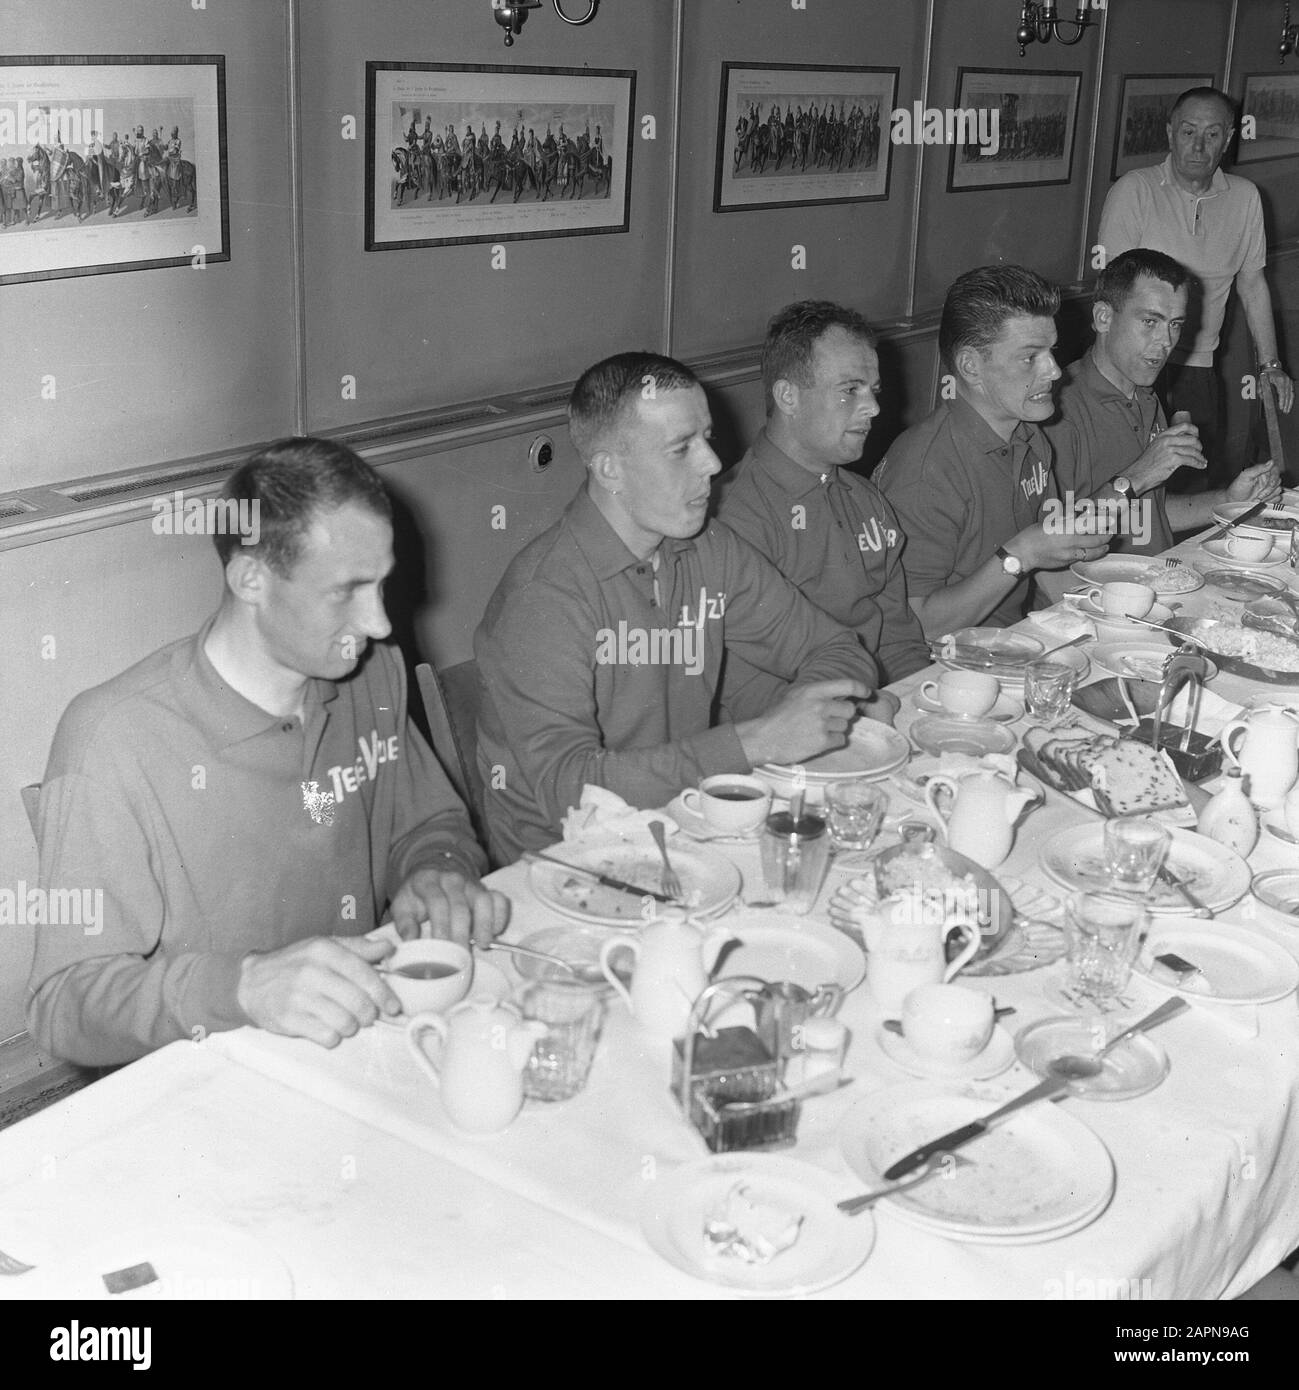 Tour de France, first stage Cologne Liège, the cyclist of Televizier at the meal Date: 22 June 1965 Keywords: stages, meals, cyclists Institution name: Televizier Stock Photo